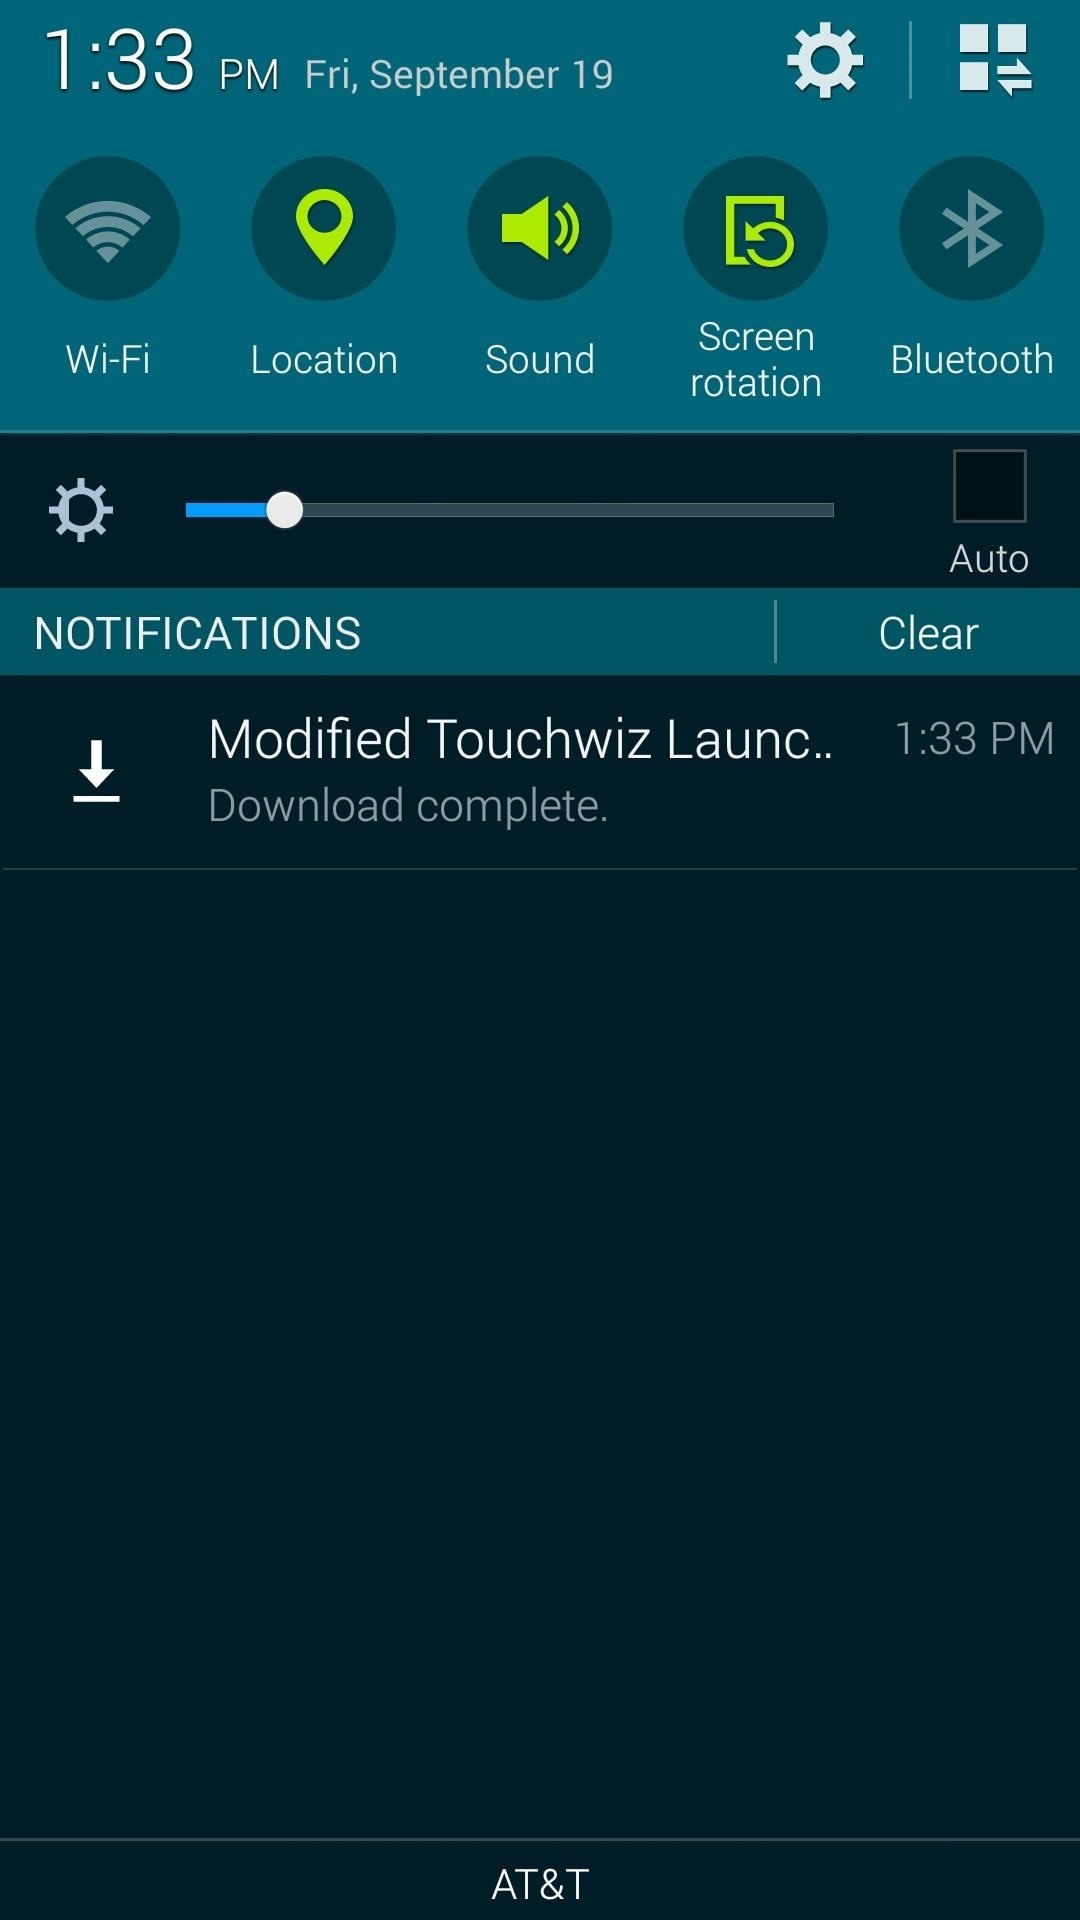 How to Theme TouchWiz on Your Samsung Galaxy S5